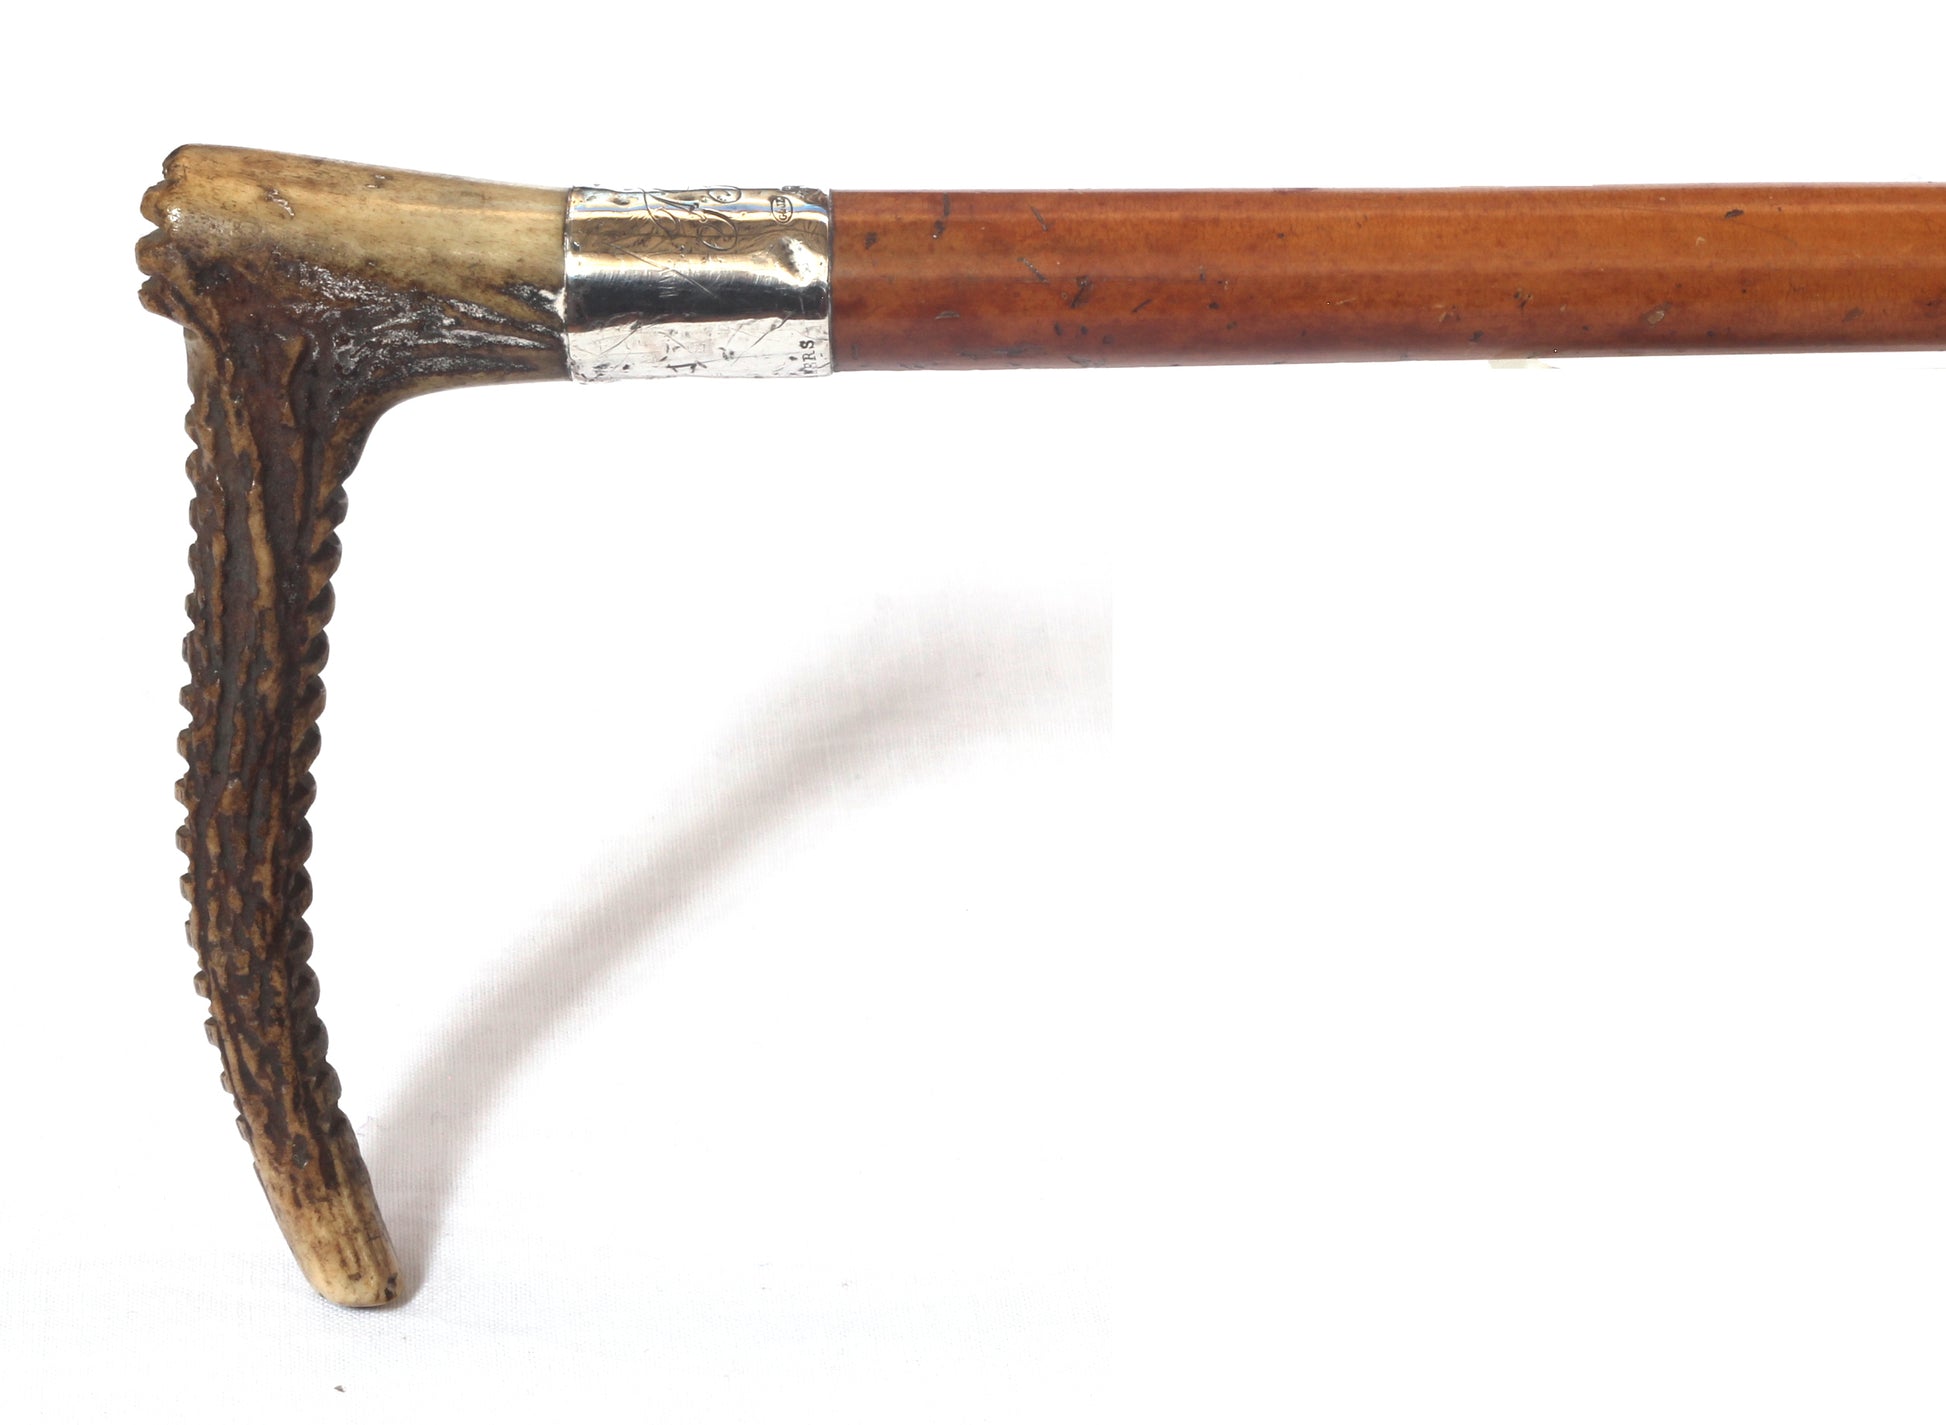 19th century hunting whip